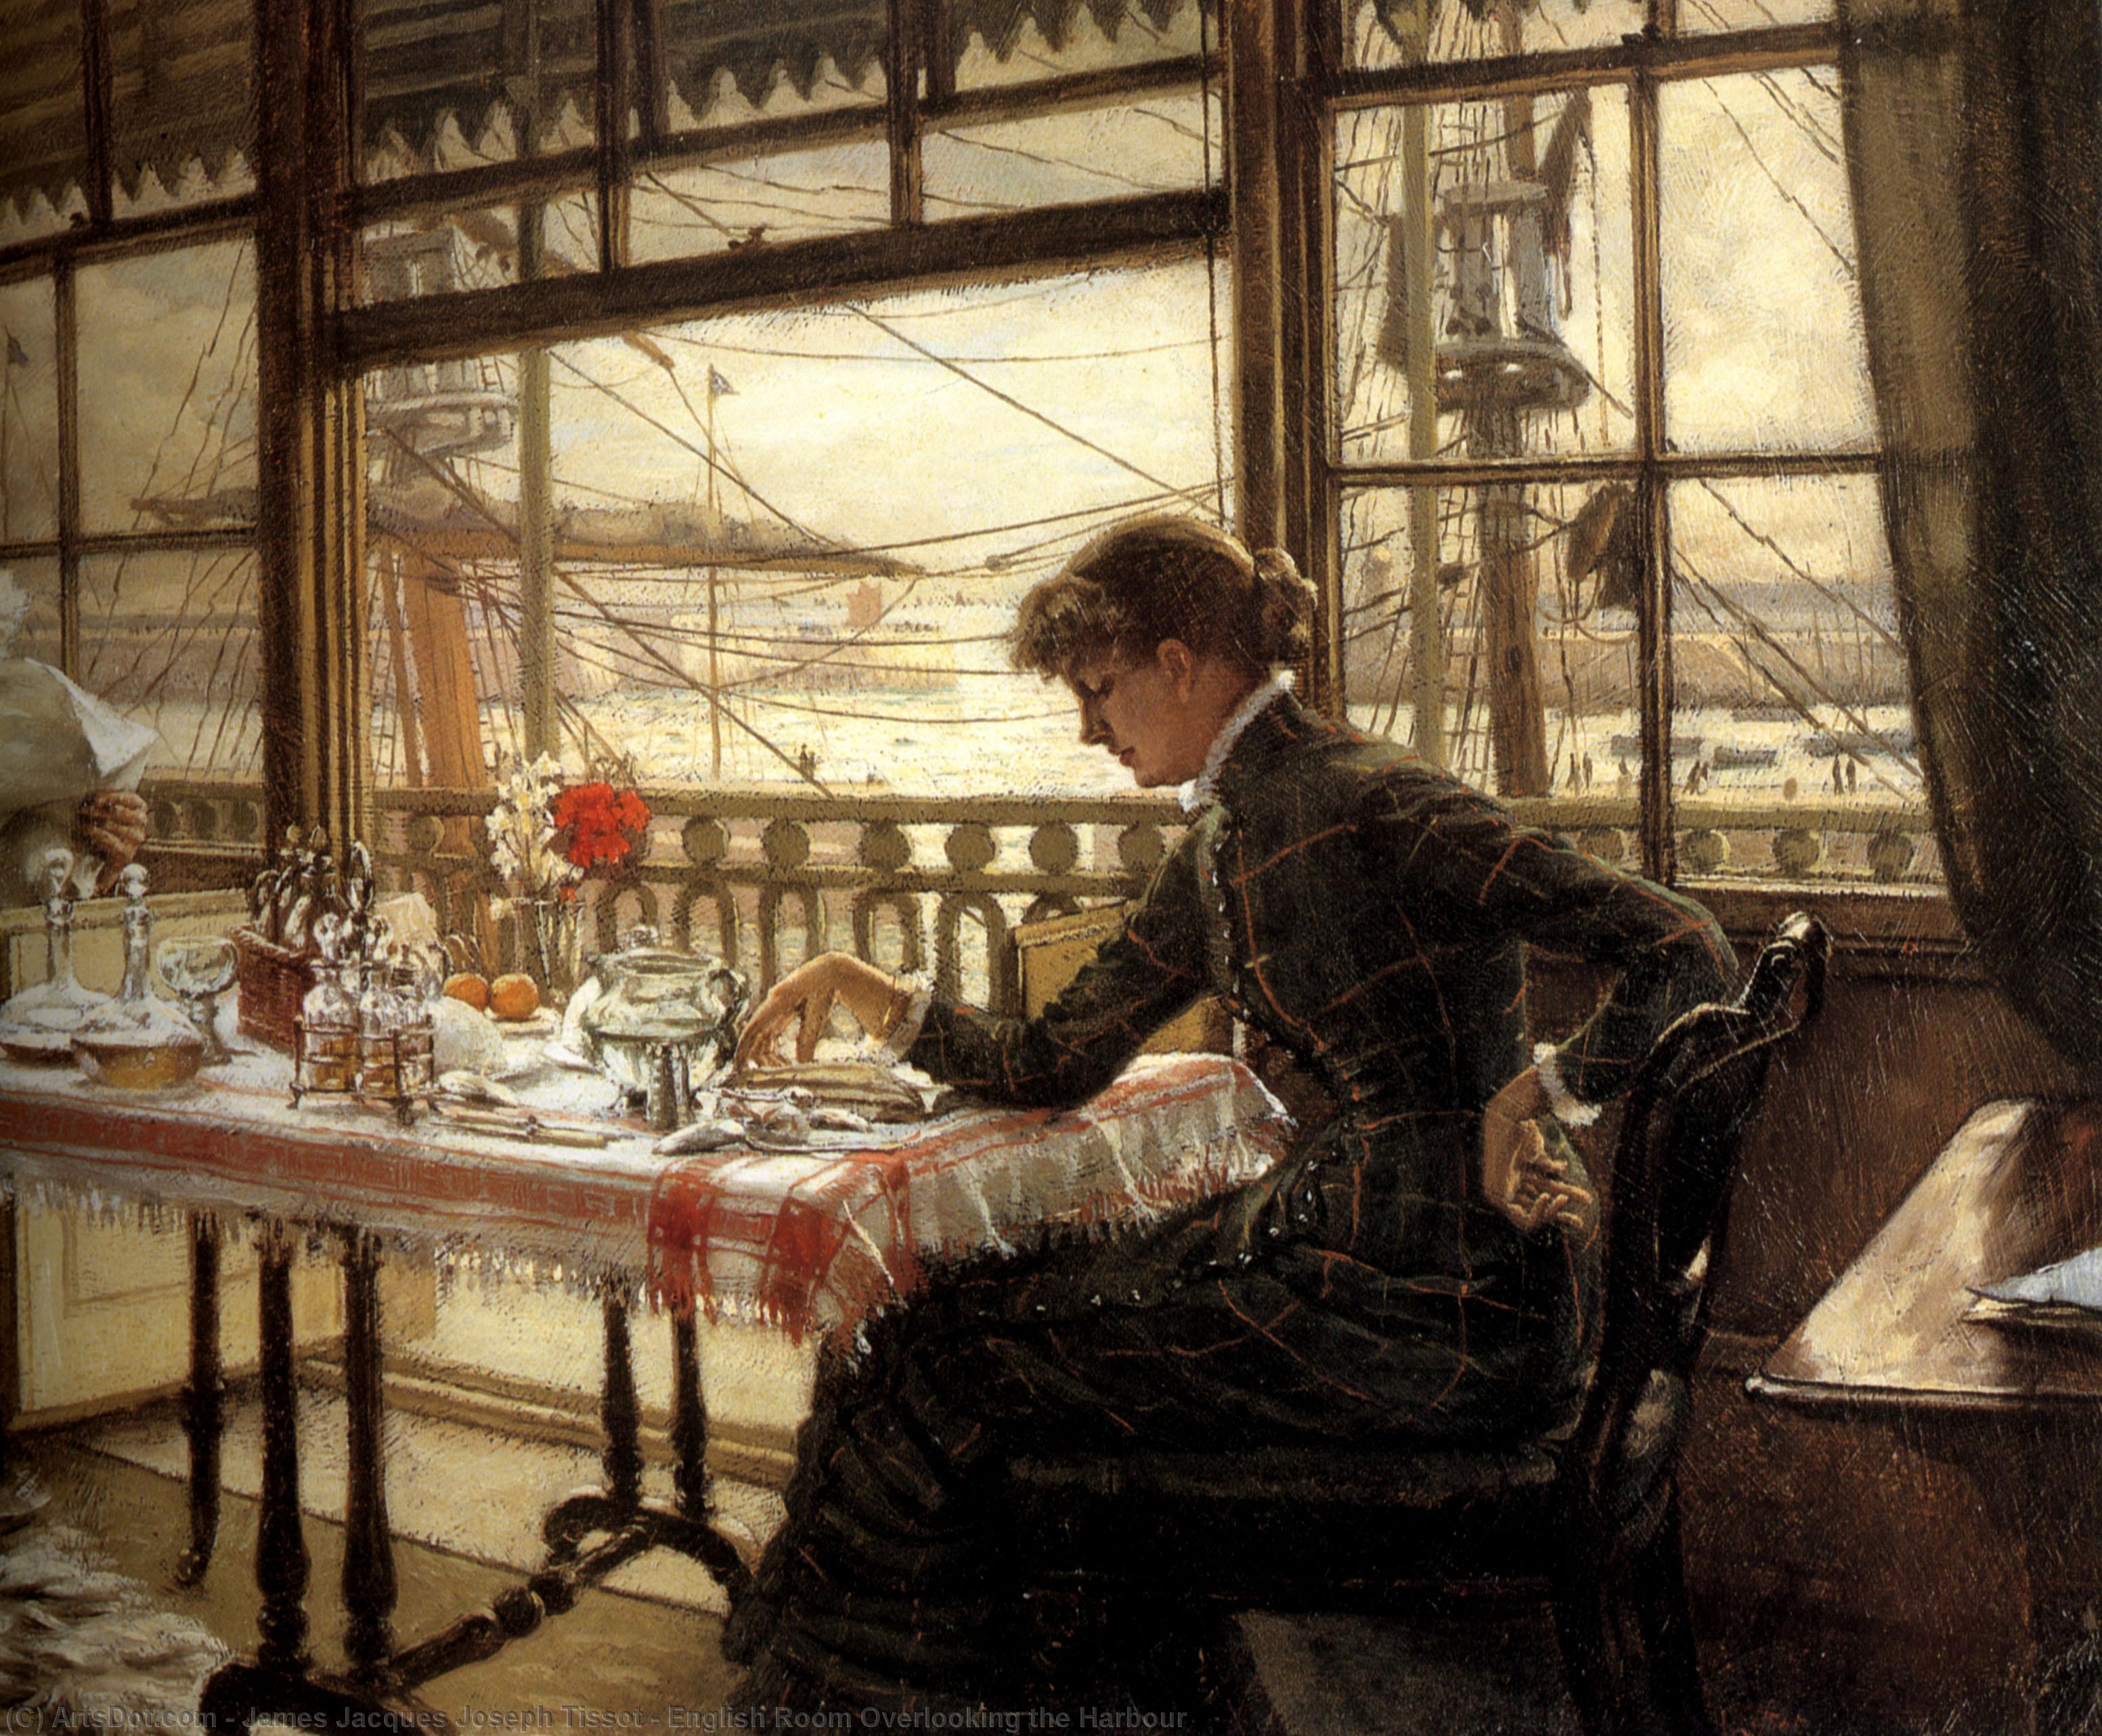 Order Oil Painting Replica English Room Overlooking the Harbour, 1878 by James Jacques Joseph Tissot (1836-1902, France) | ArtsDot.com